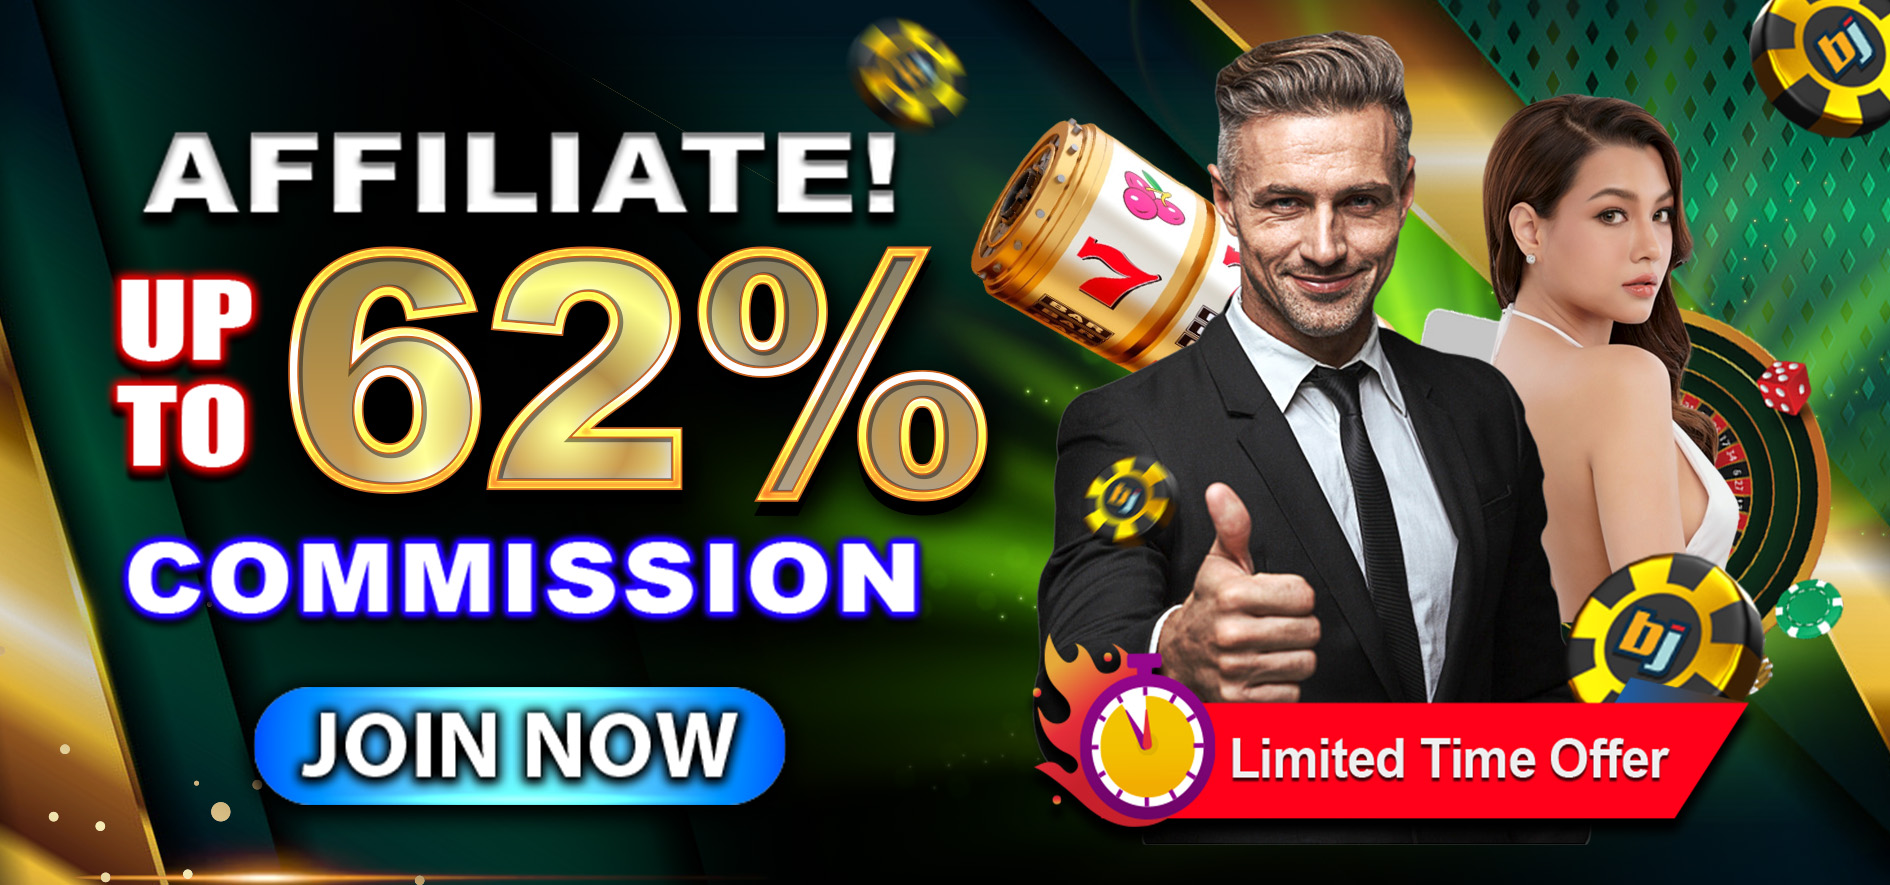 AFFILIATE PROMOTION LIMITED TIME OFFER 62� web view